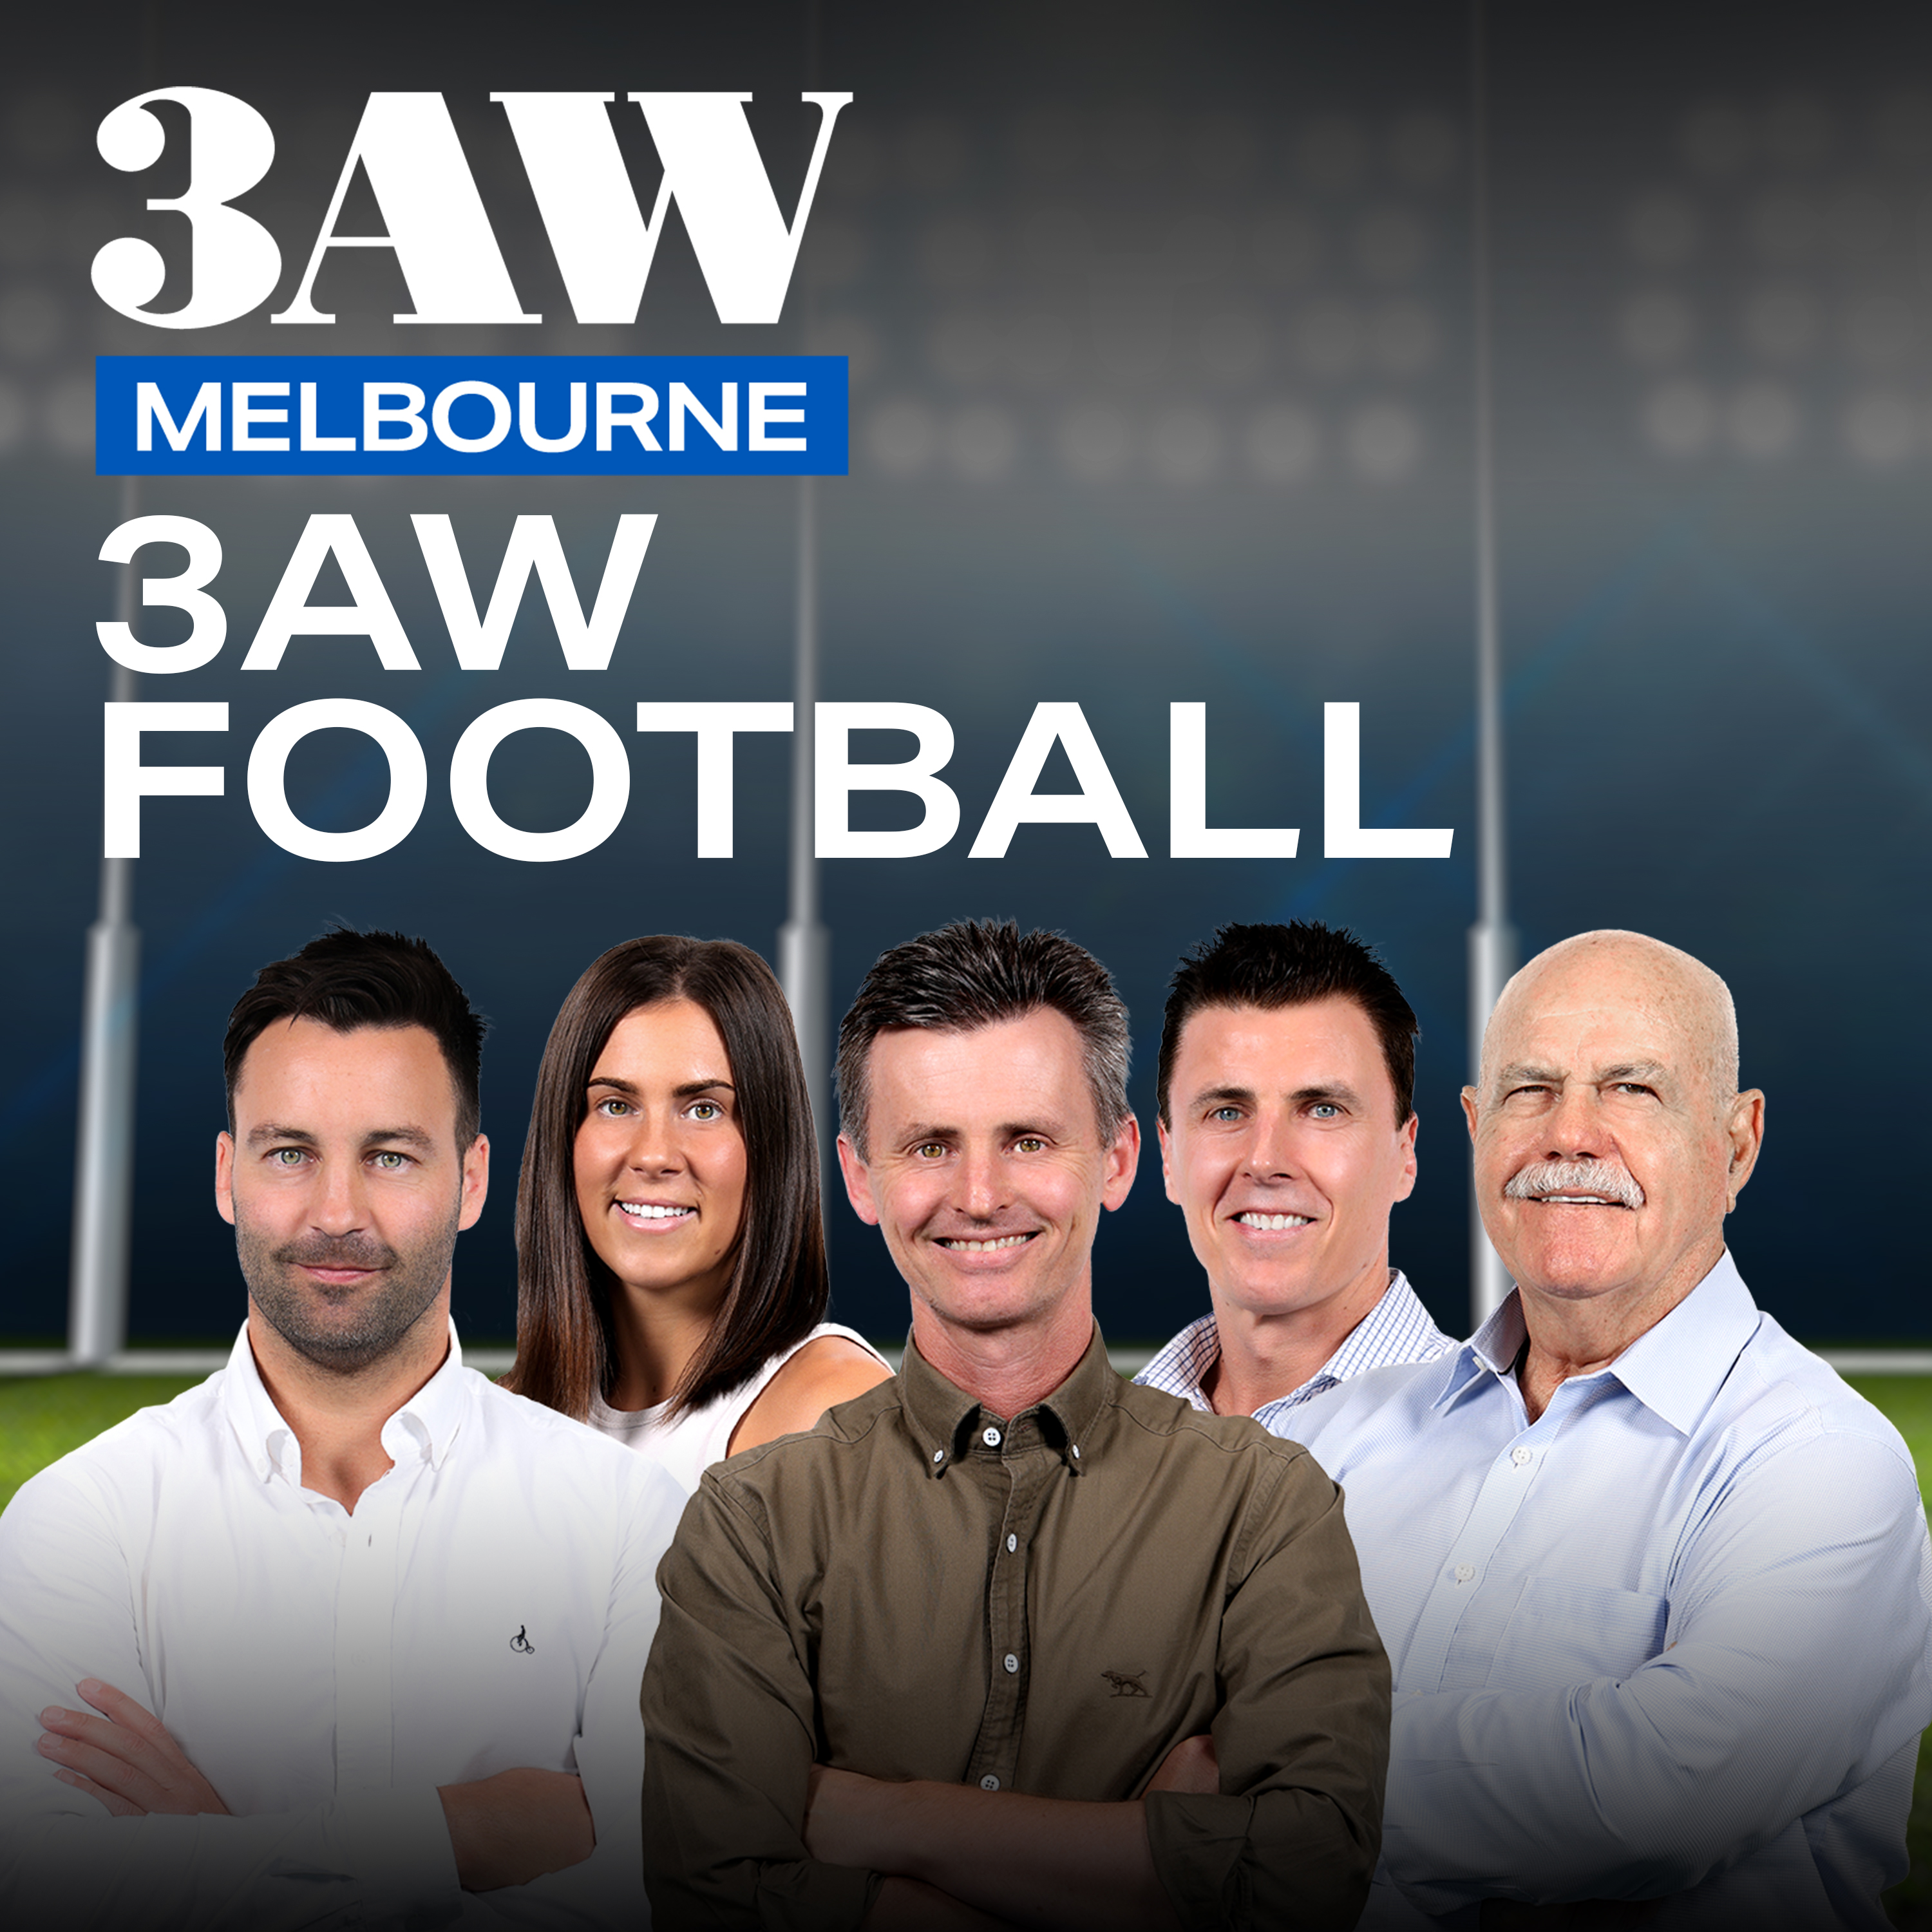 "BANG!": Eddie McGuire's first moments behind a 3AW Football commentary microphone